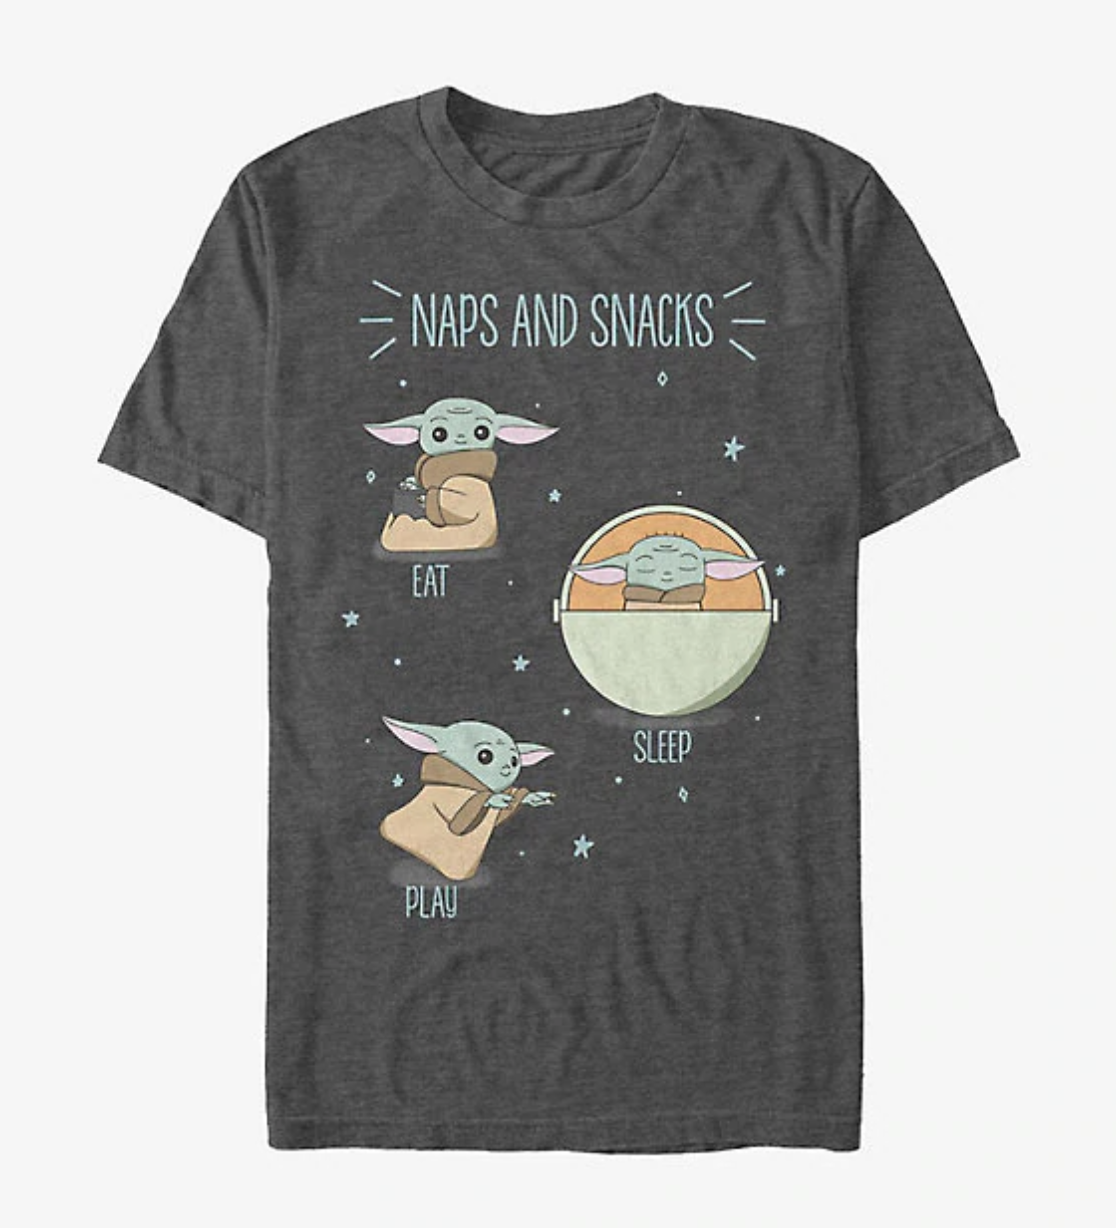 Baby Yoda illustrated tee that says &quot;naps and snacks, eat, sleep, play&quot; 